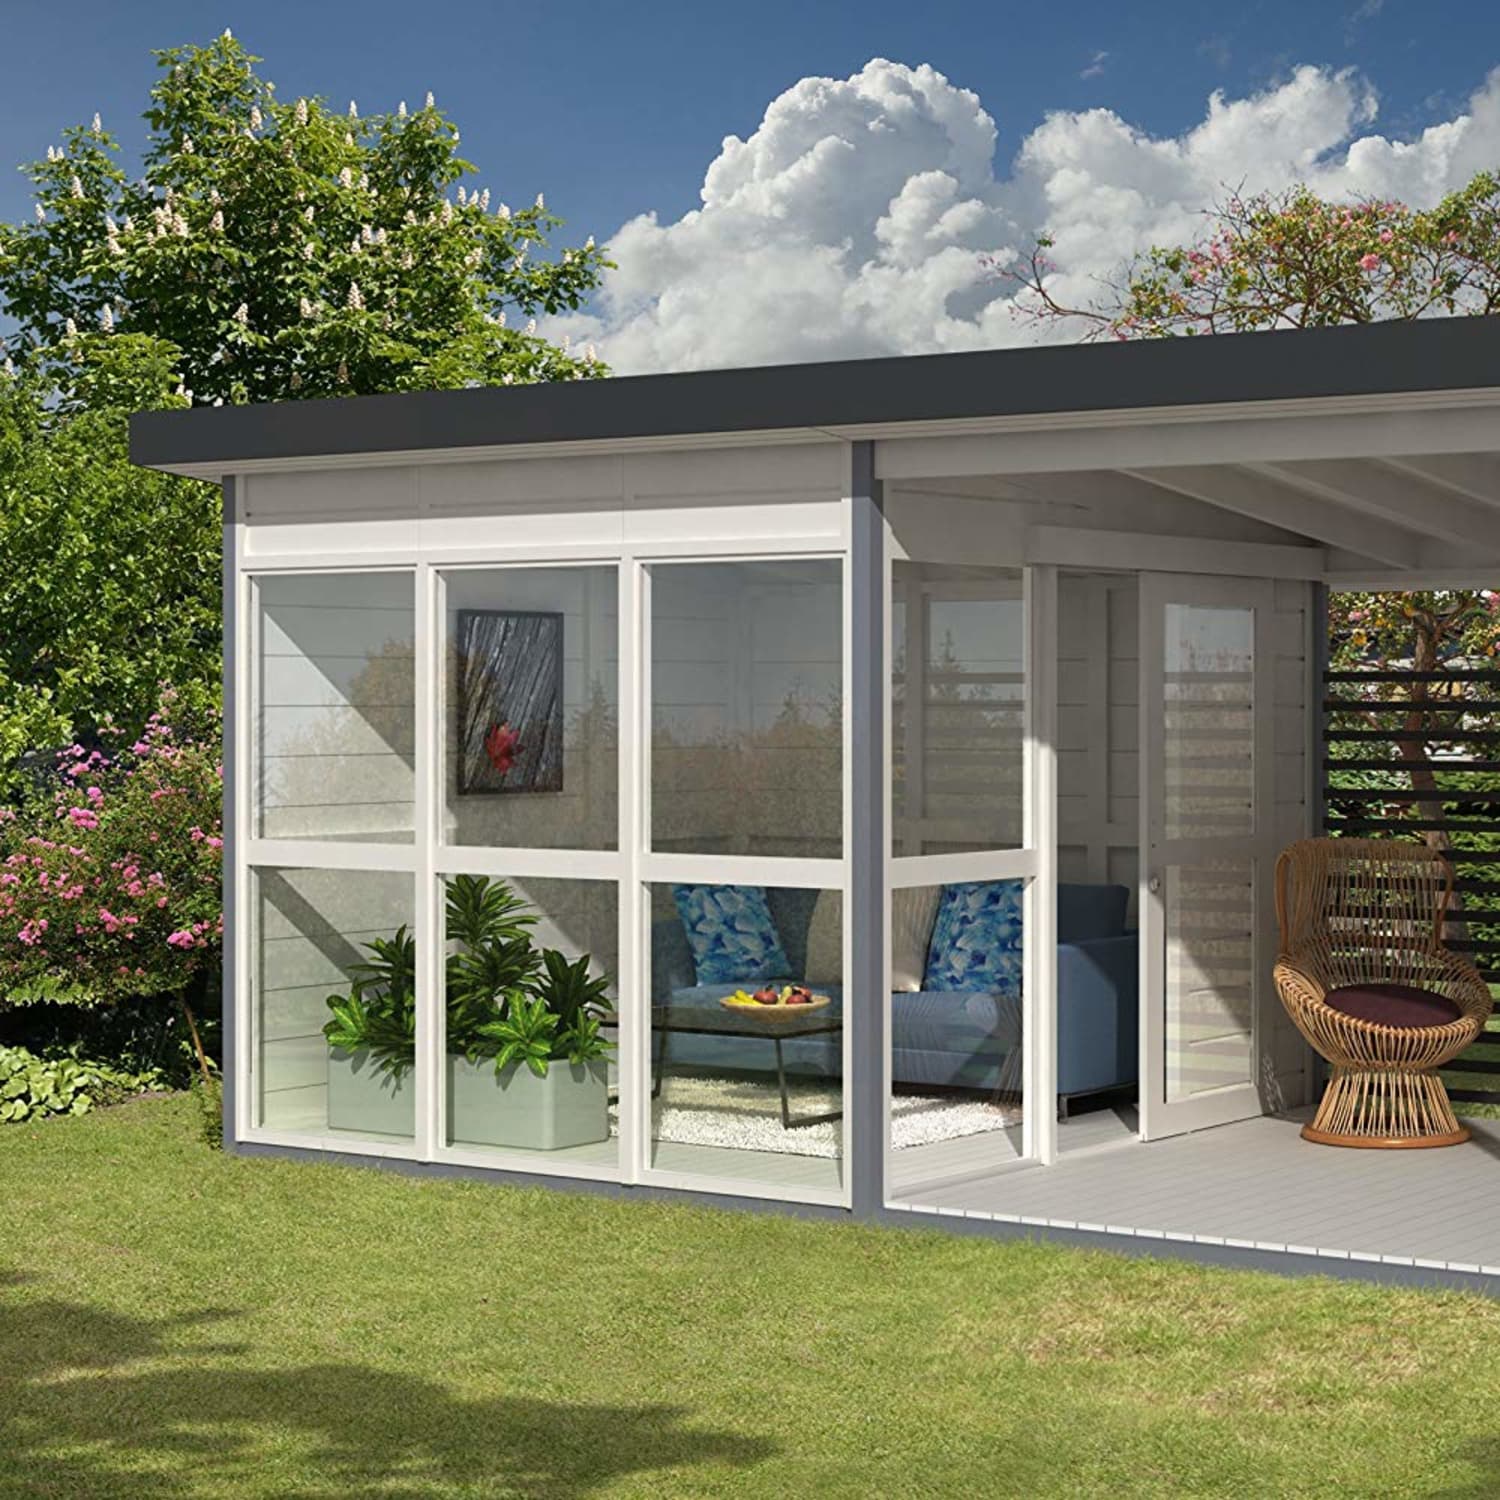 is selling a 'modern' tiny home kit for just $2,400 - it has fast  installation and qualifies for extended returns